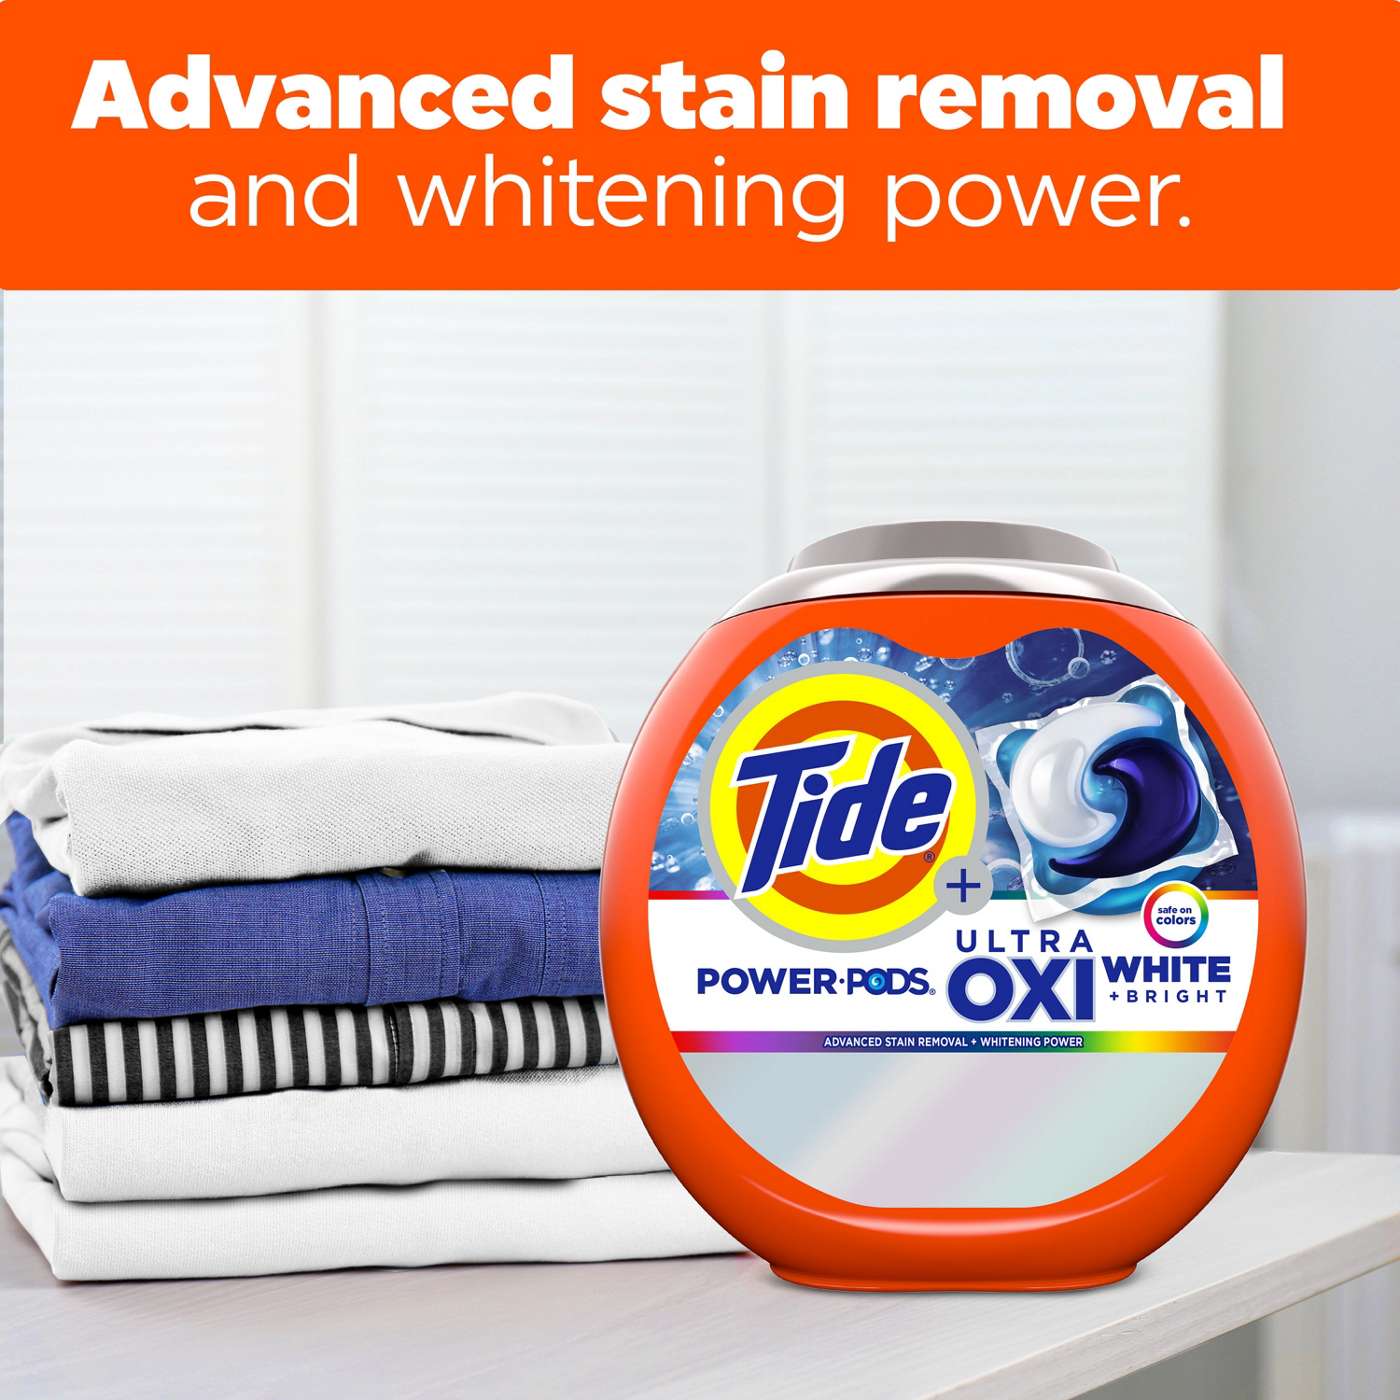 Tide Power PODS Ultra Oxi White & Bright Laundry Detergent Pacs; image 7 of 9